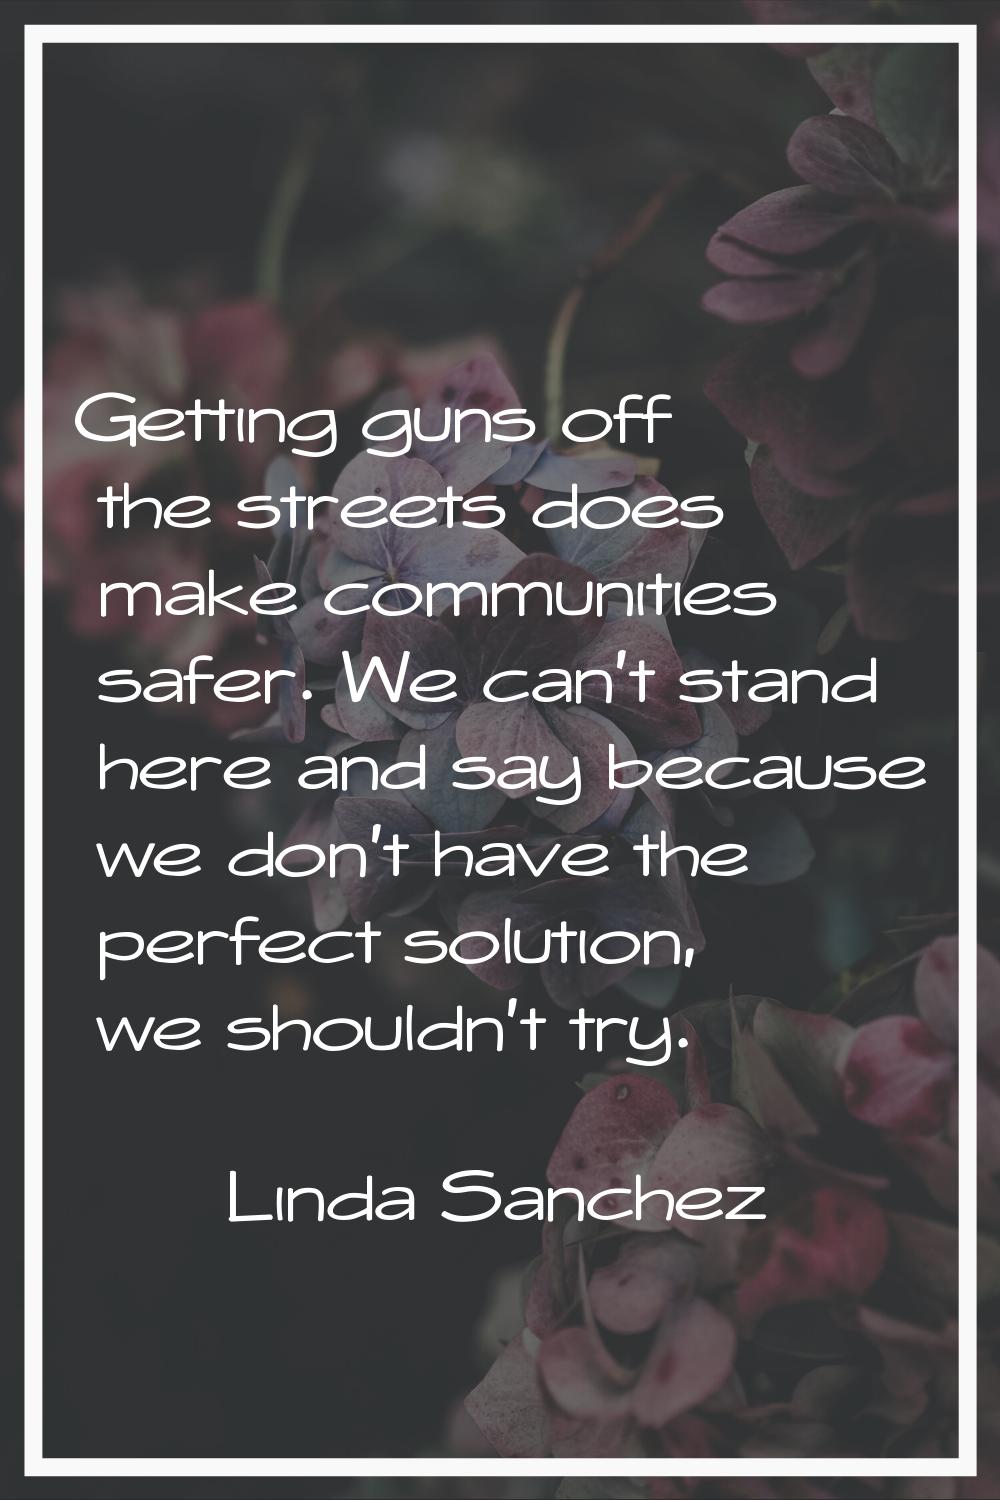 Getting guns off the streets does make communities safer. We can't stand here and say because we do